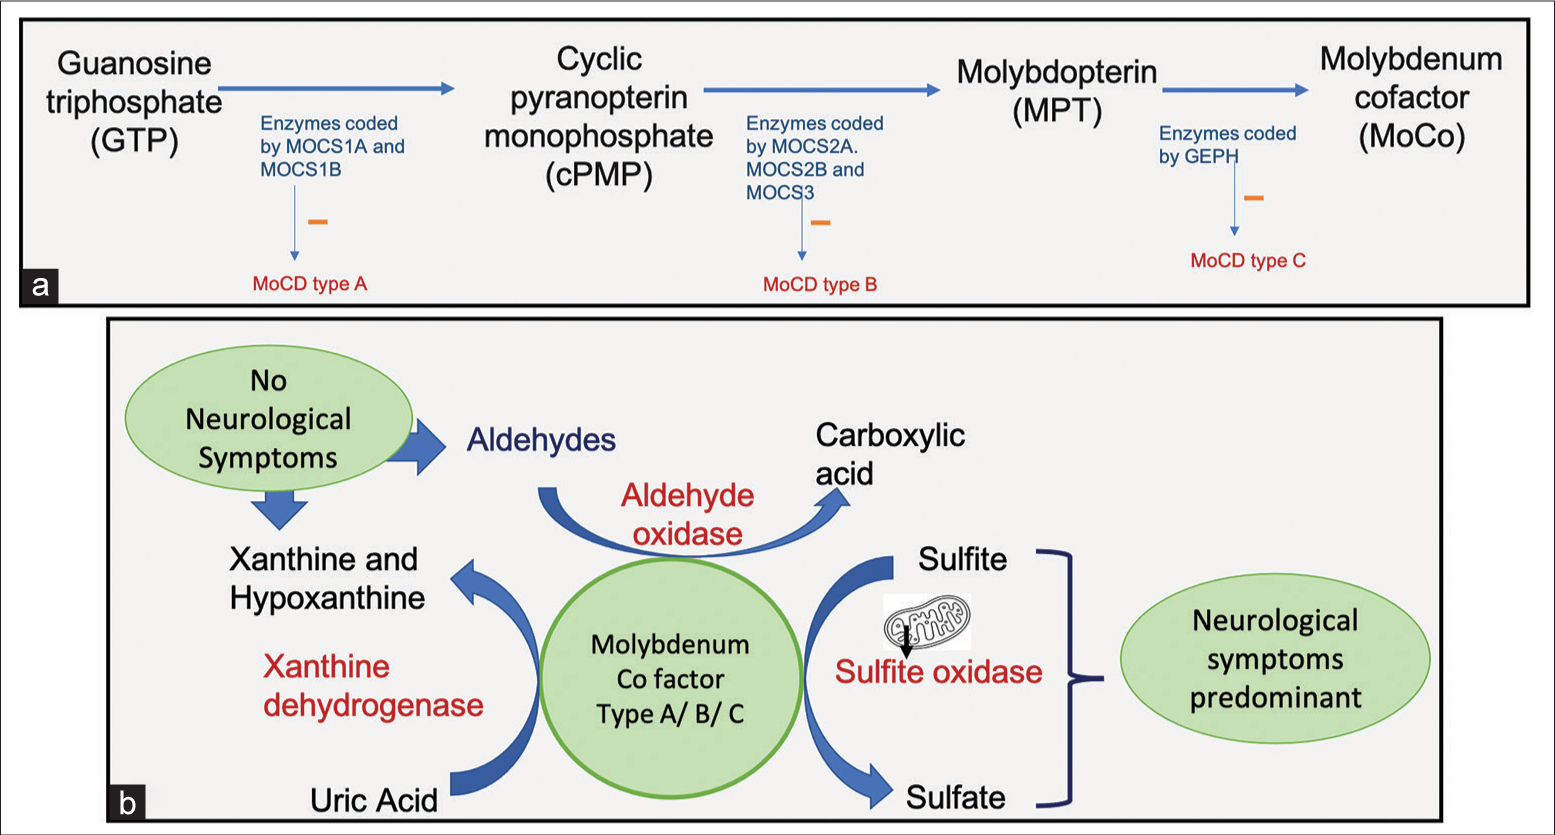 (a) Schematic flow diagram of synthesis of molybdenum cofactor and the role of the Molybdenum cofactor synthesis genes (MOCS) genes in its synthesis. (b) Schematic diagram representing the role of various molybdenum cofactor enzymes in the metabolic pathways.